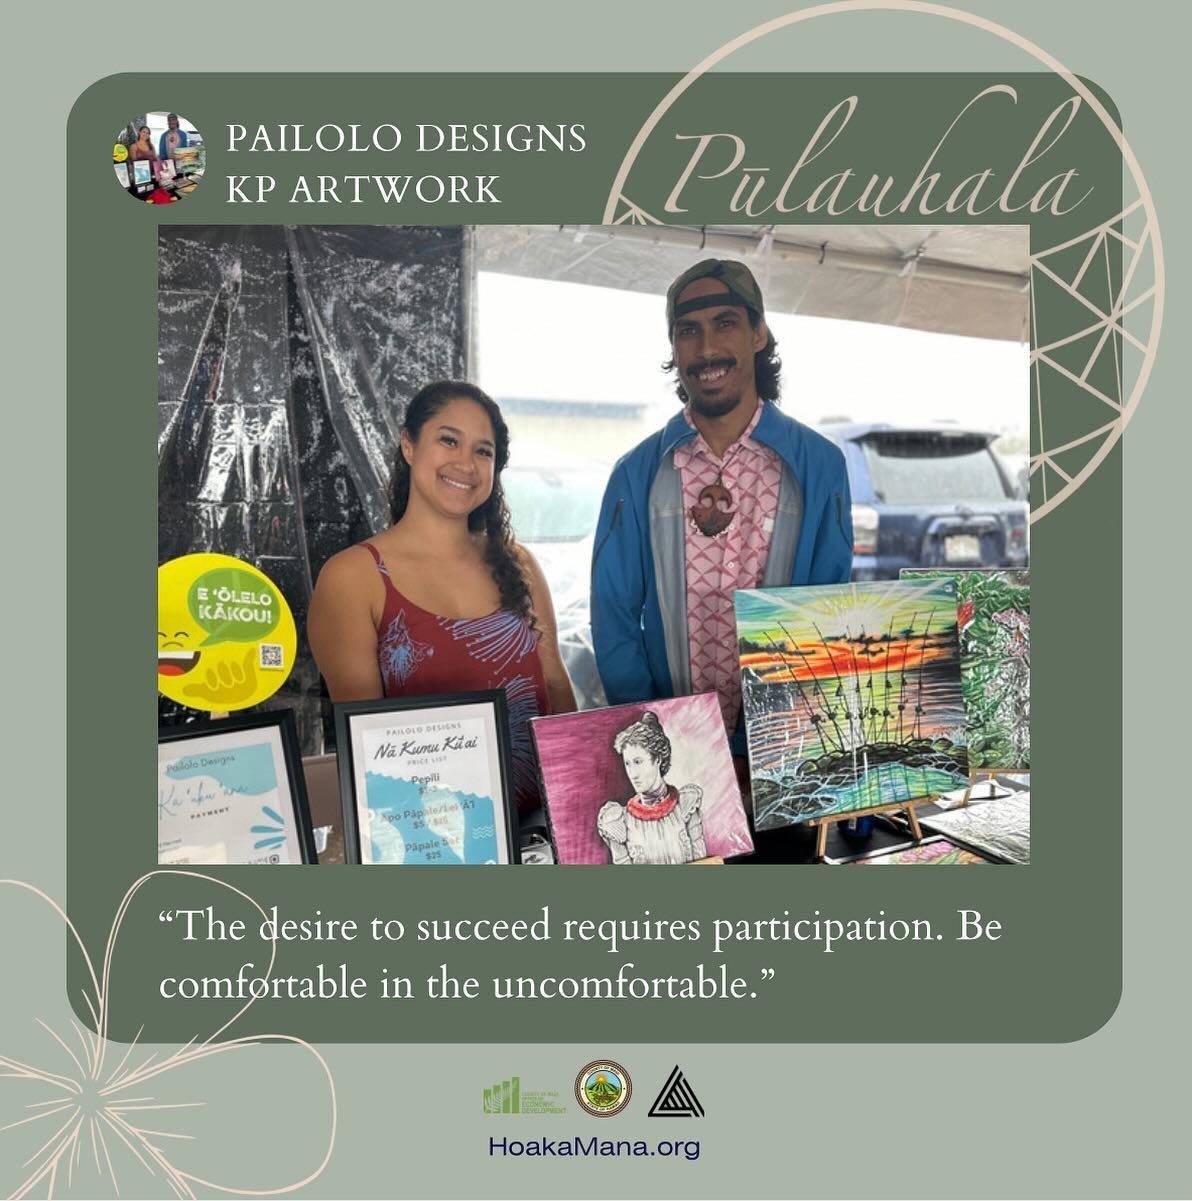 &ldquo;The desire to succeed requires participation. Be comfortable in the uncomfortable&rdquo; Kahu Pono Kanoelani Davis reminds us all the time that everything is going to be ok, so leap! 

Congratulations to @k_p_artwork and @pailolodesigns for br